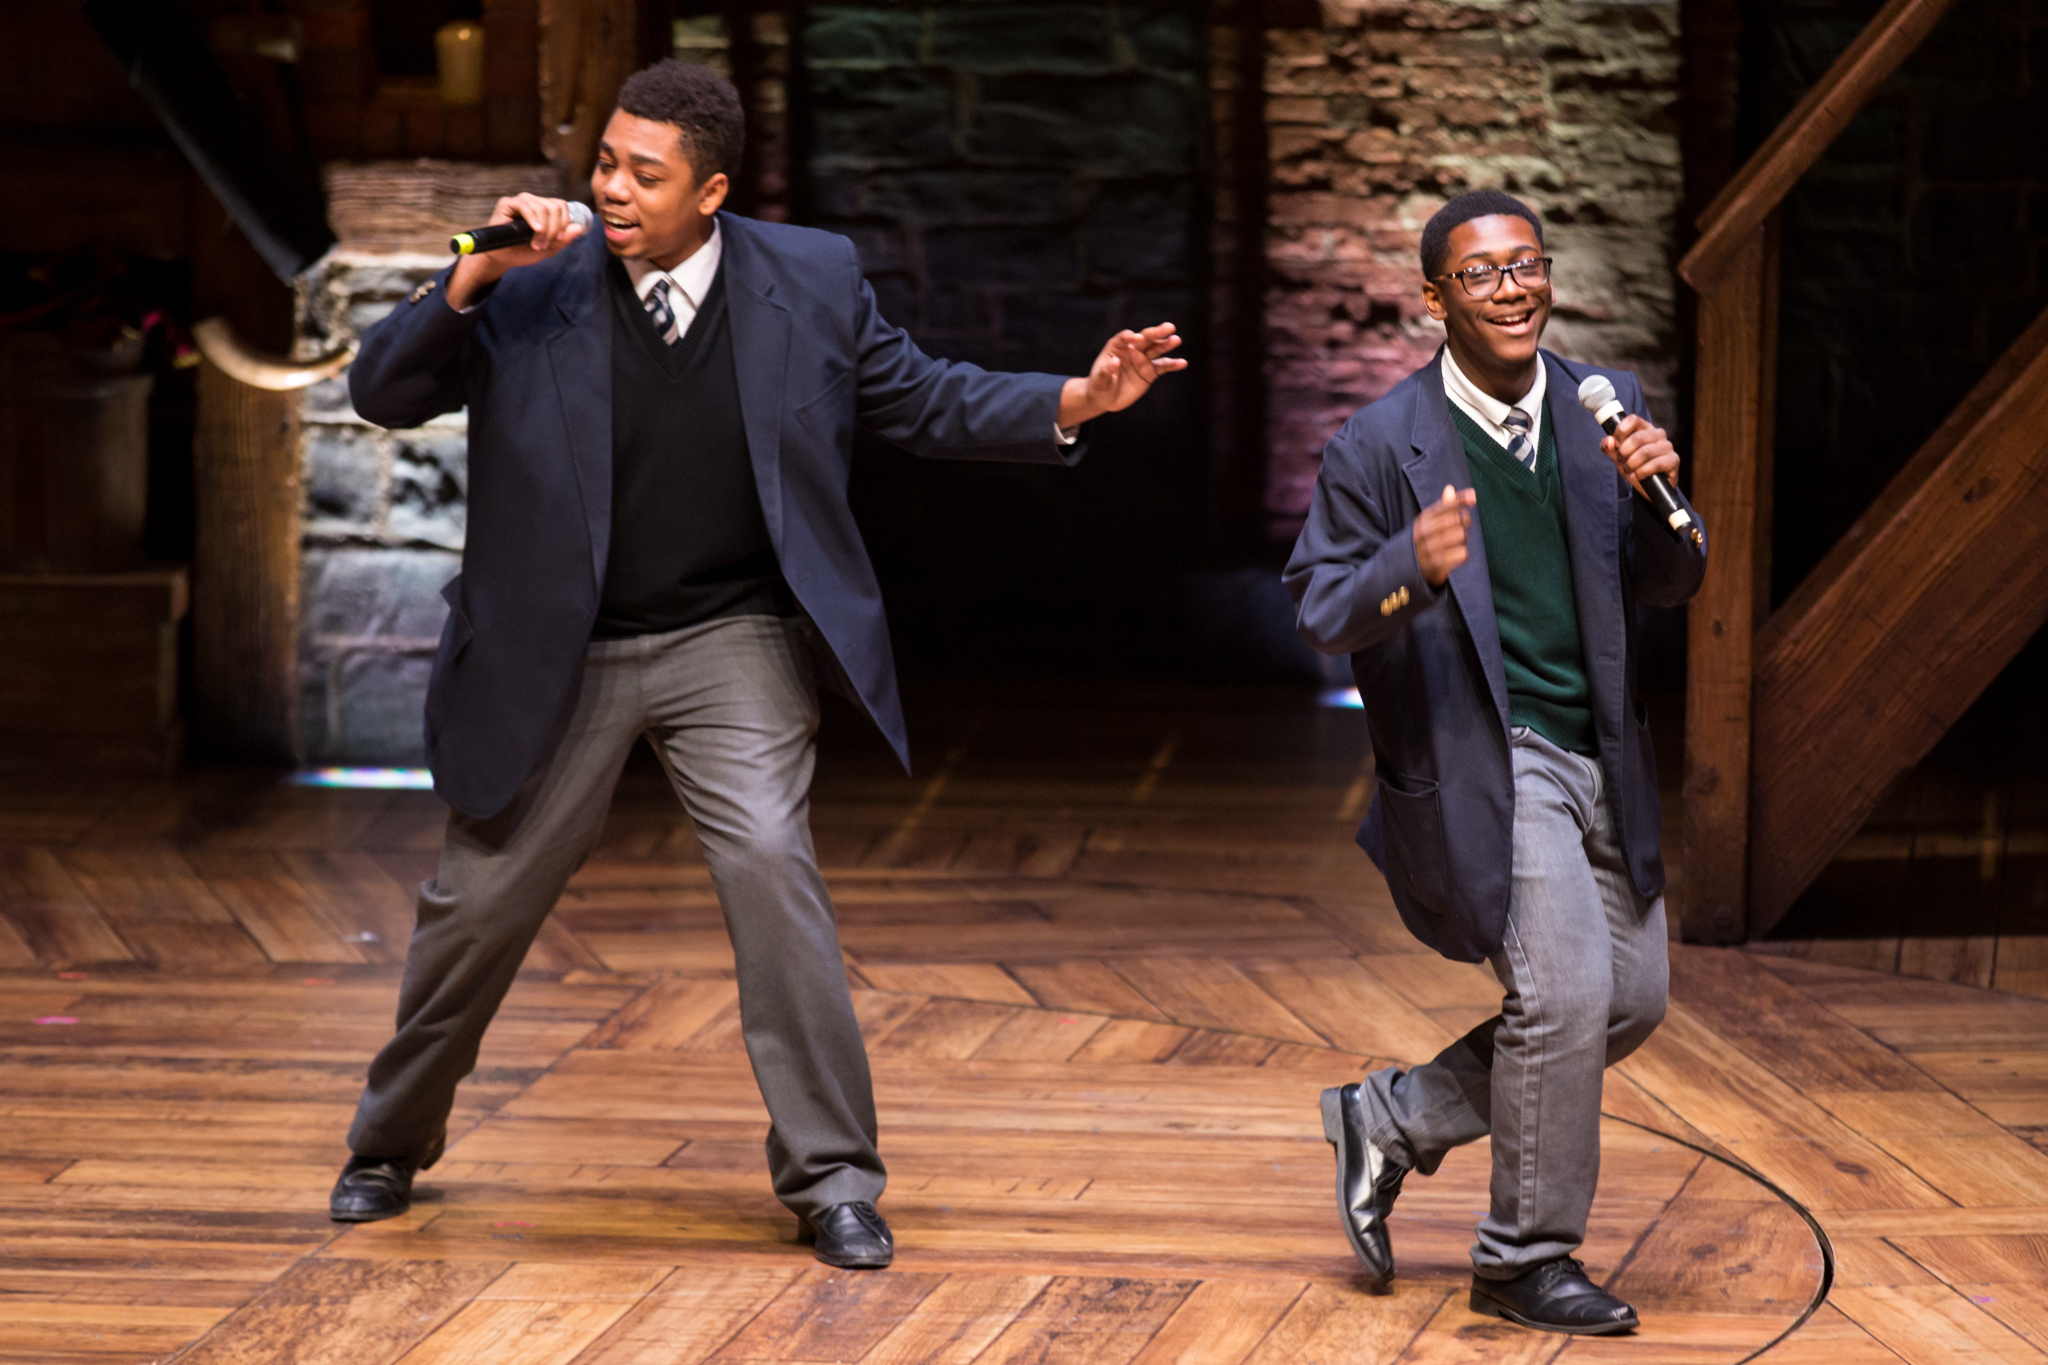 Students Marcus Bornelus and Kendrick Jones performing on stage during a HEP student matinee in Chicago on 02/ 22/17